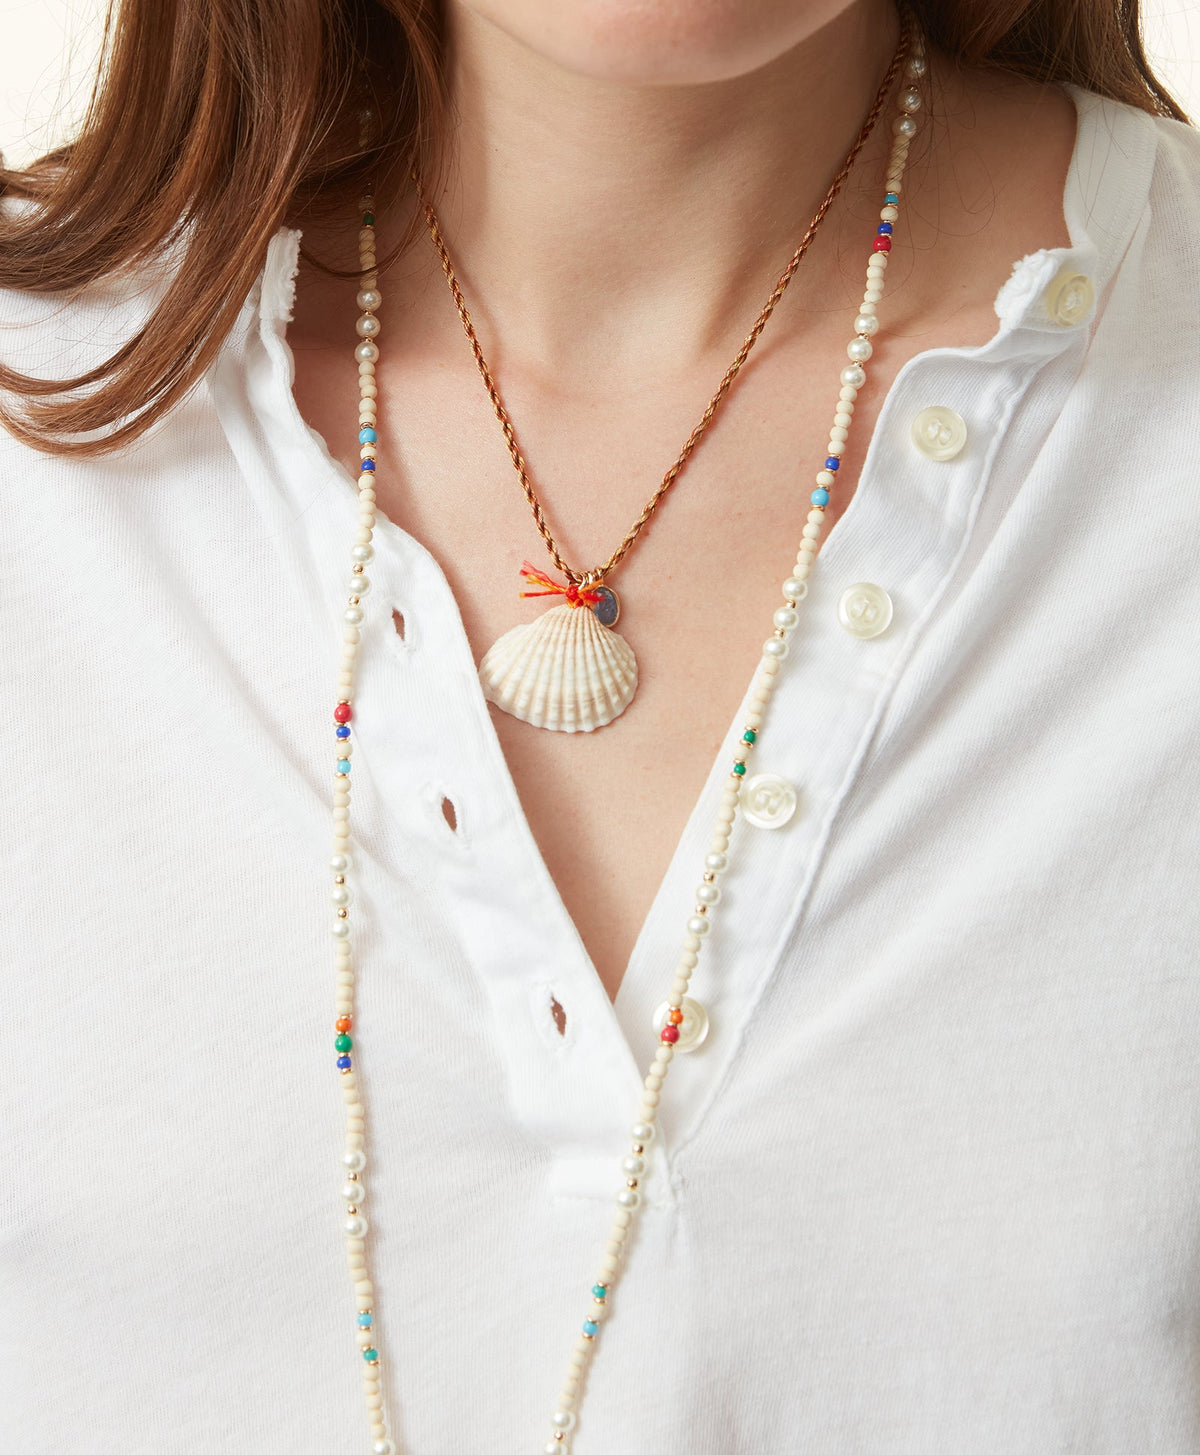 The Shell Pendant Necklace